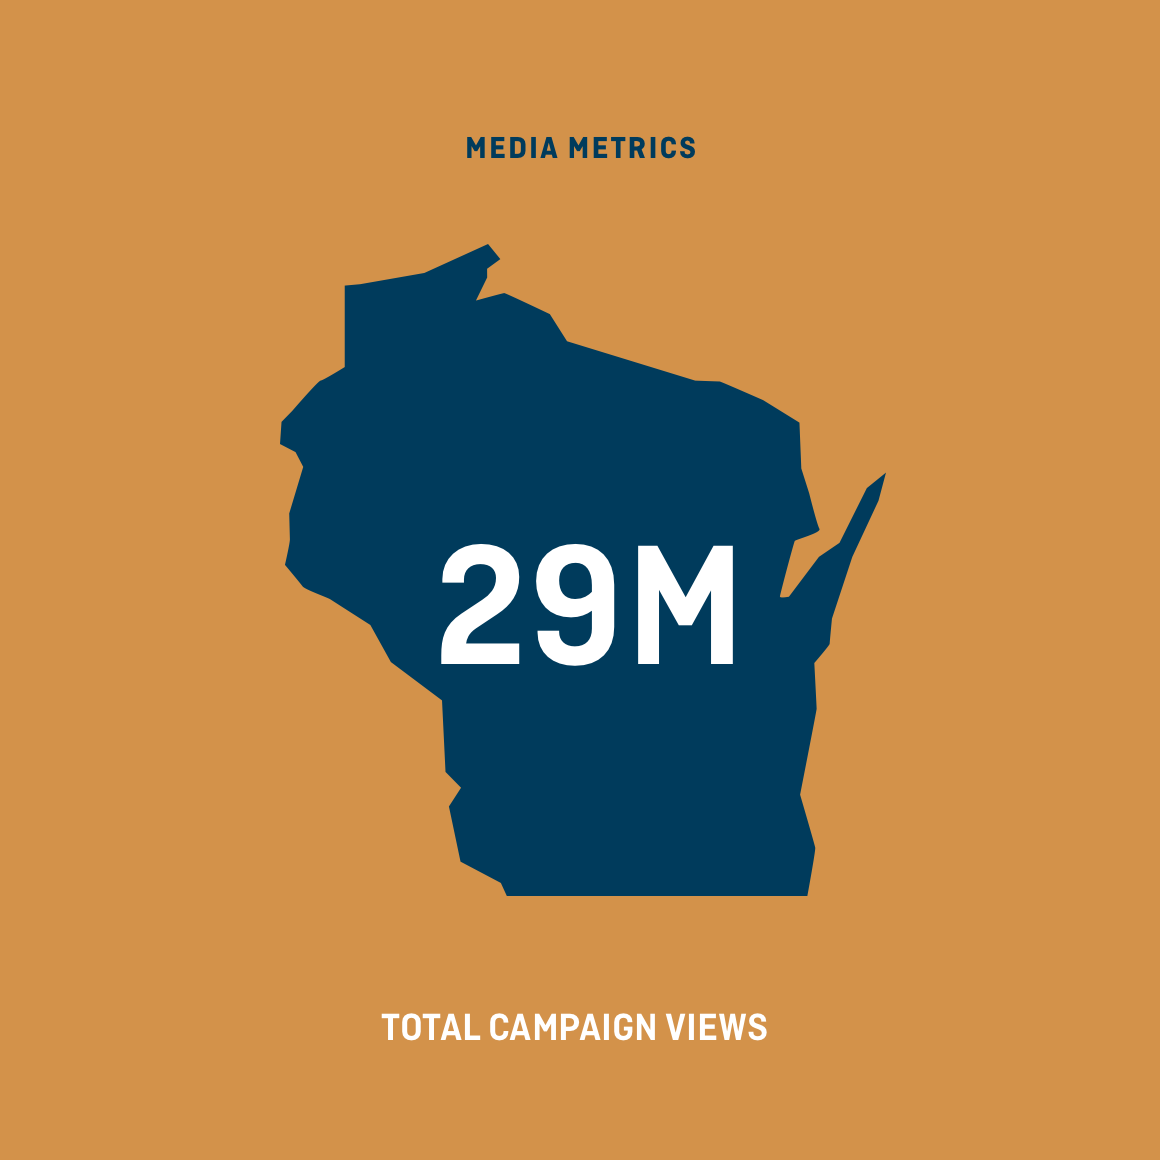 Graphic of the state of Wisconsin showing 29 million campaign views